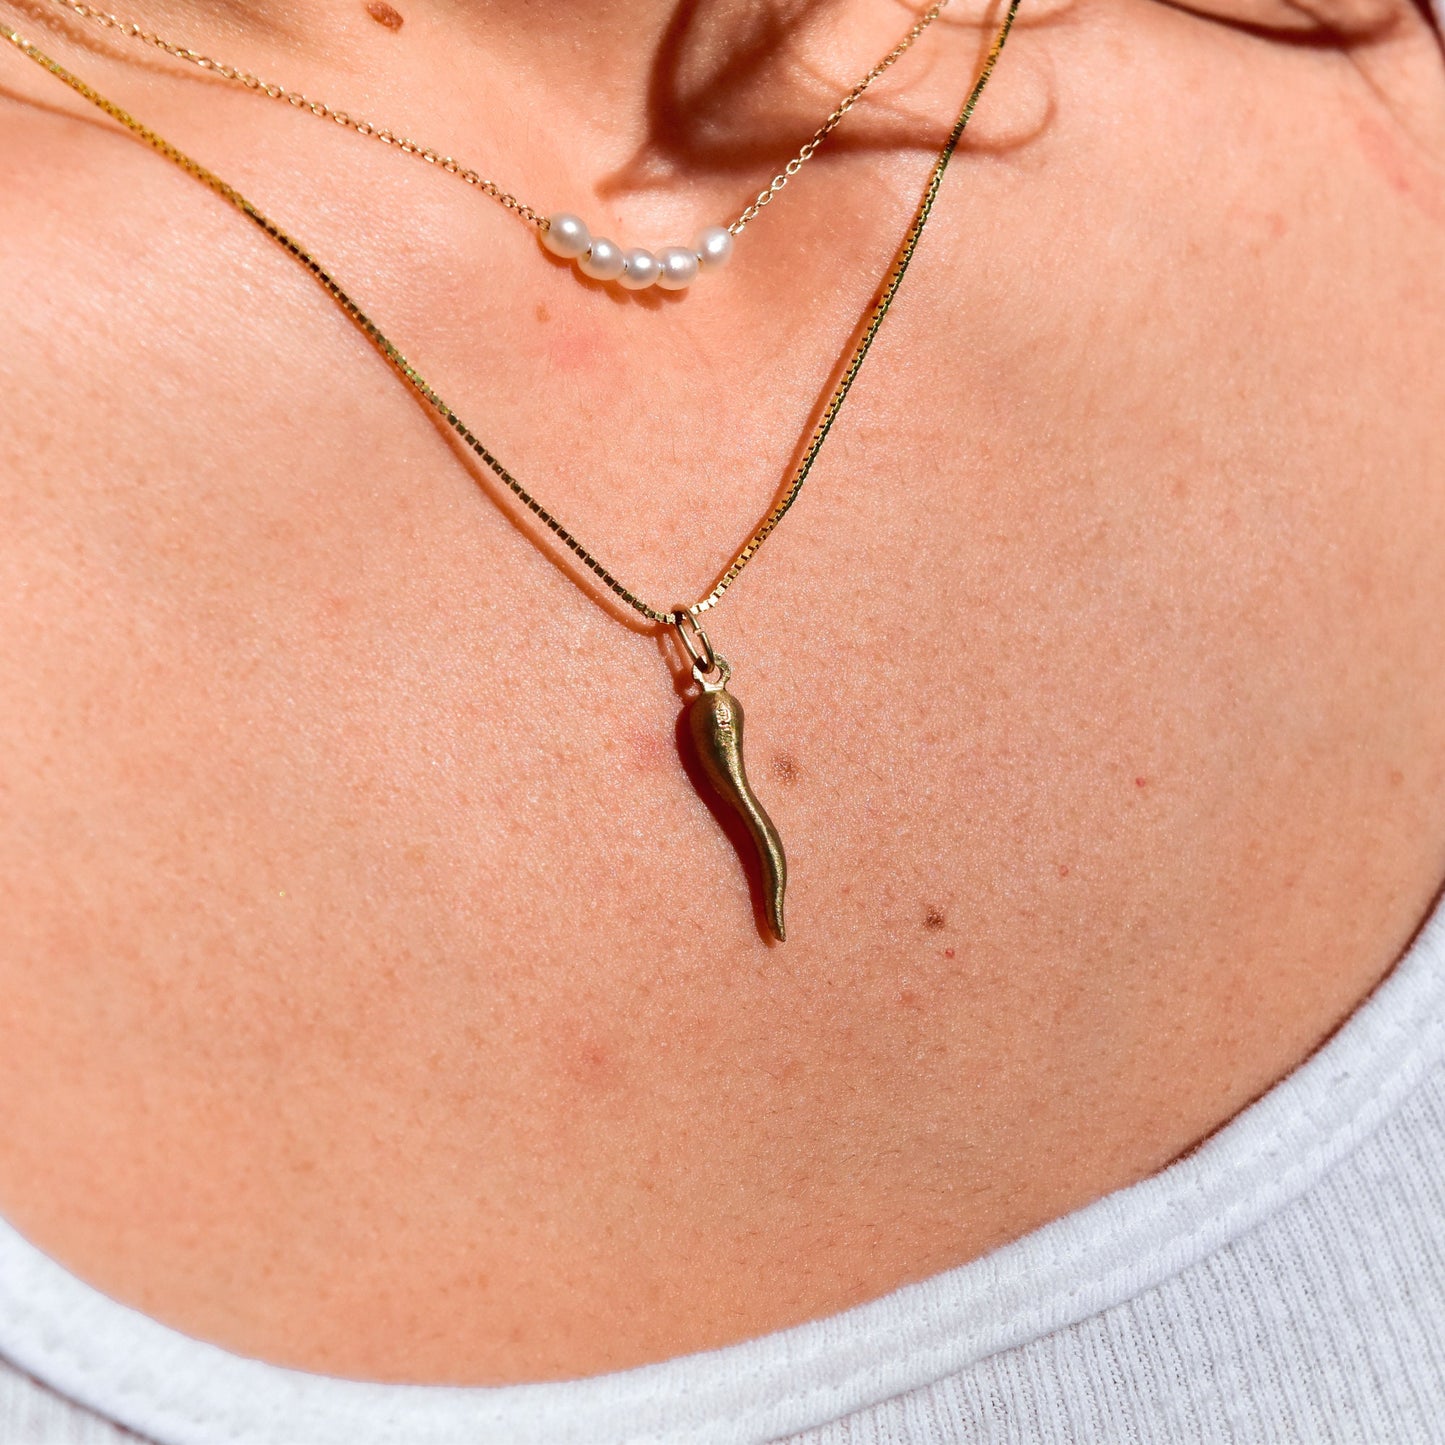 Delicate golden necklaces with pearls and a small horn-shaped pendant resting on the collarbones of a person, symbolizing good luck and protection in Italian tradition.